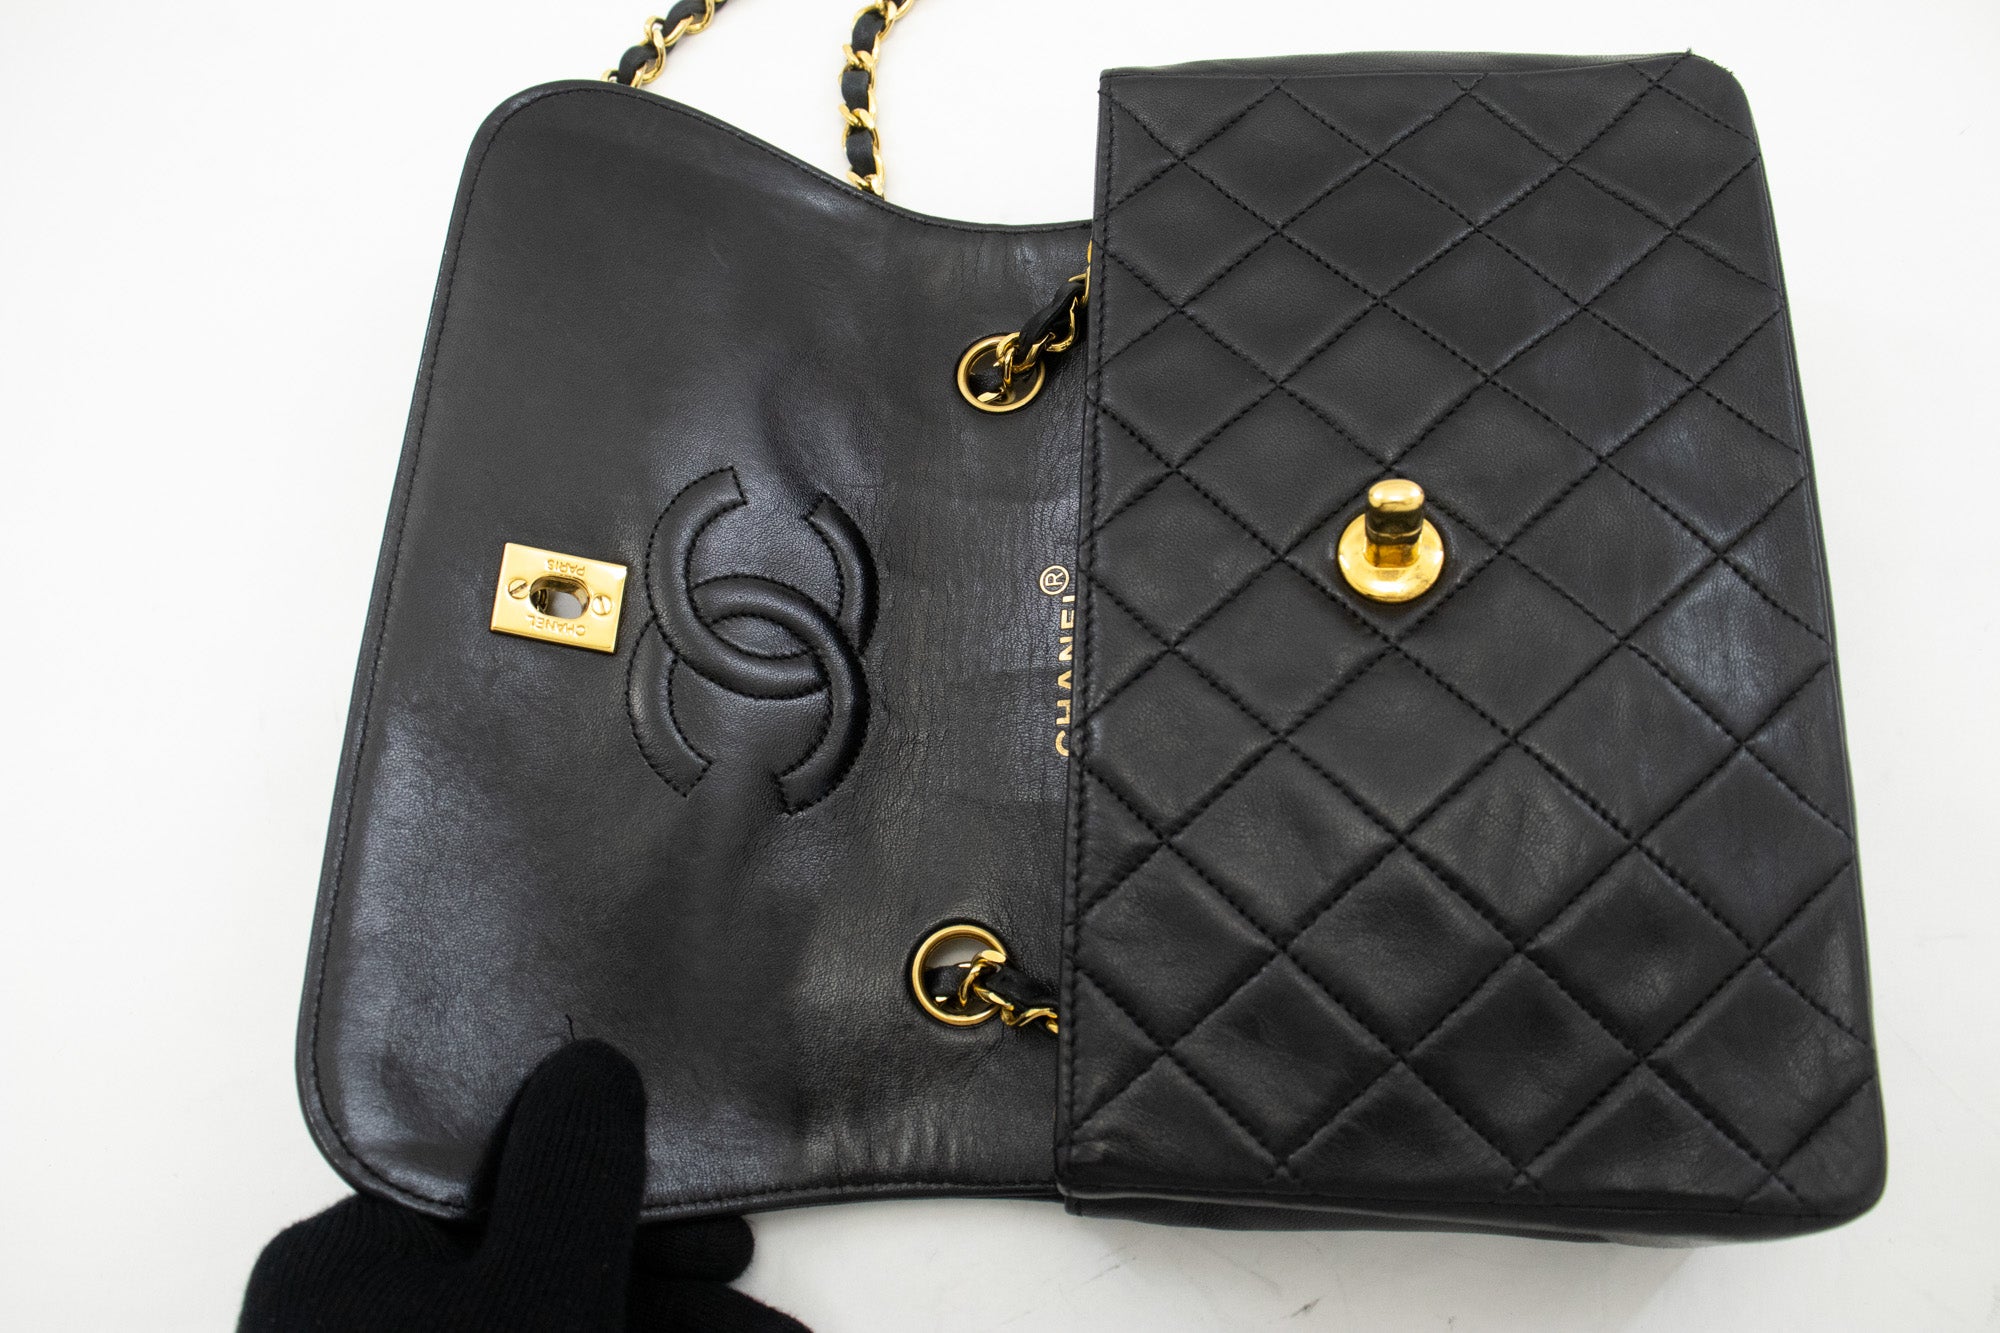 Timeless/classique leather handbag Chanel Black in Leather - 36158731